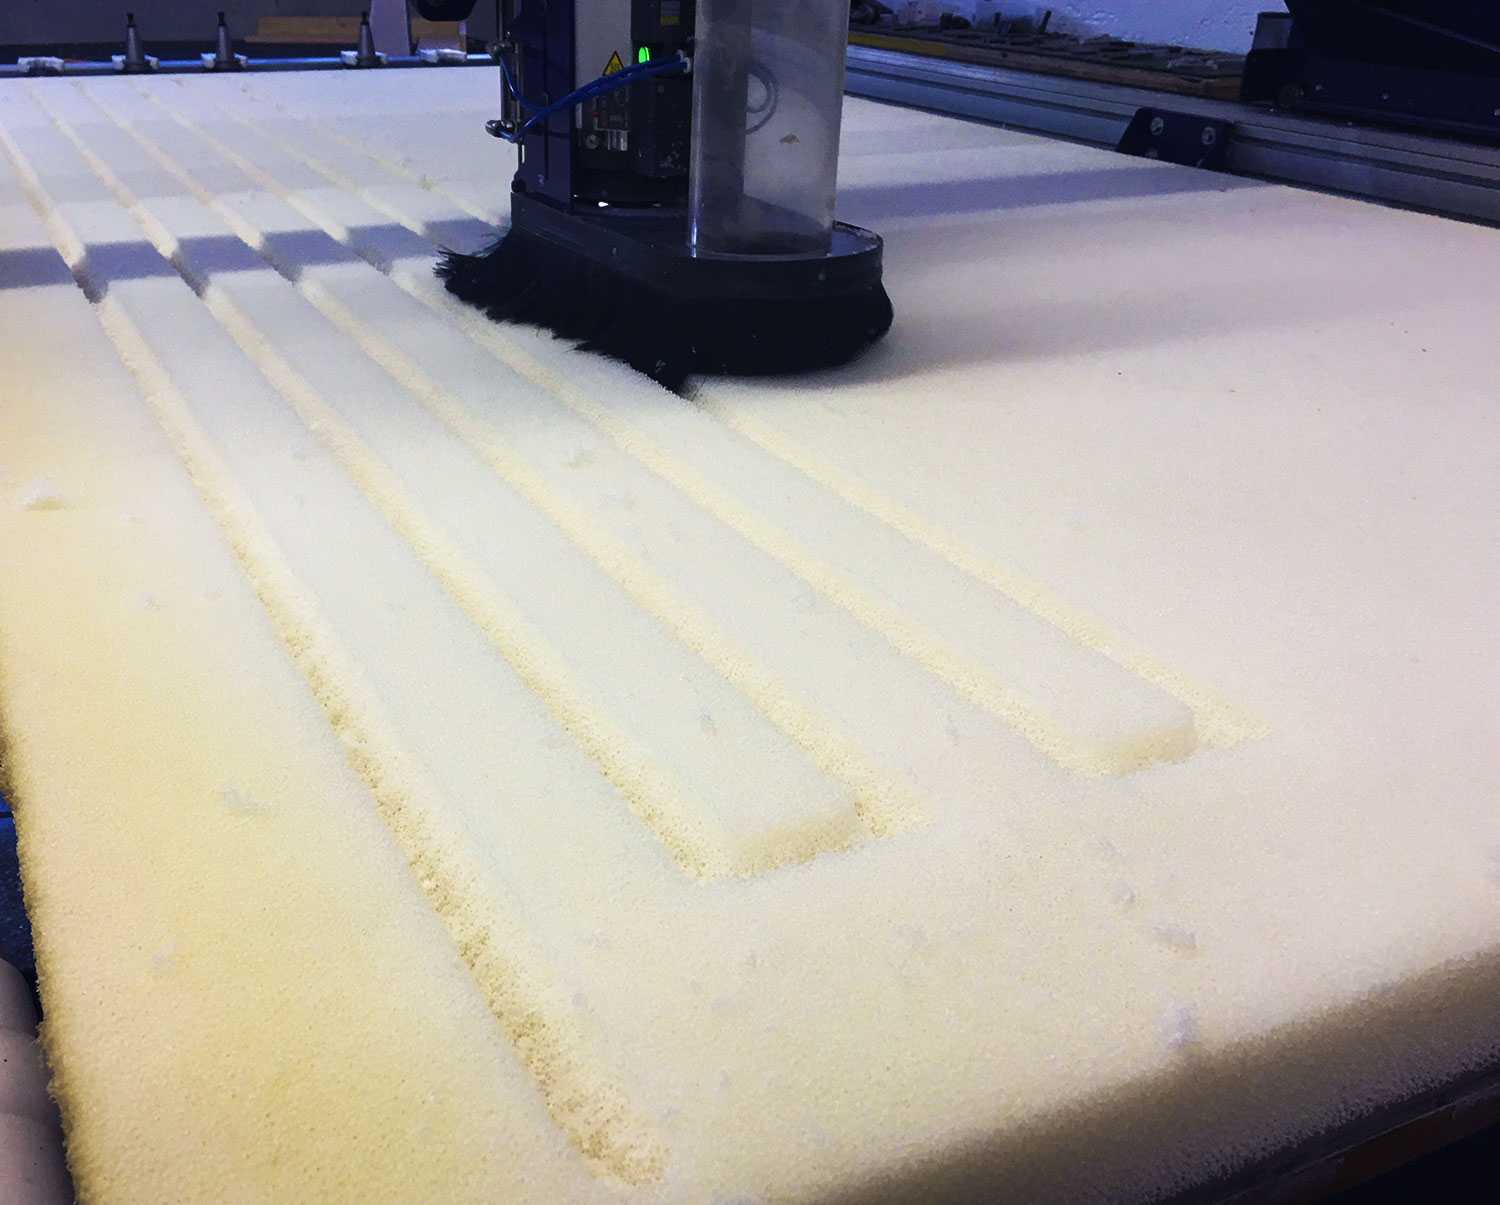 3 axis cnc machine cutting perfect lines into styrofoam.